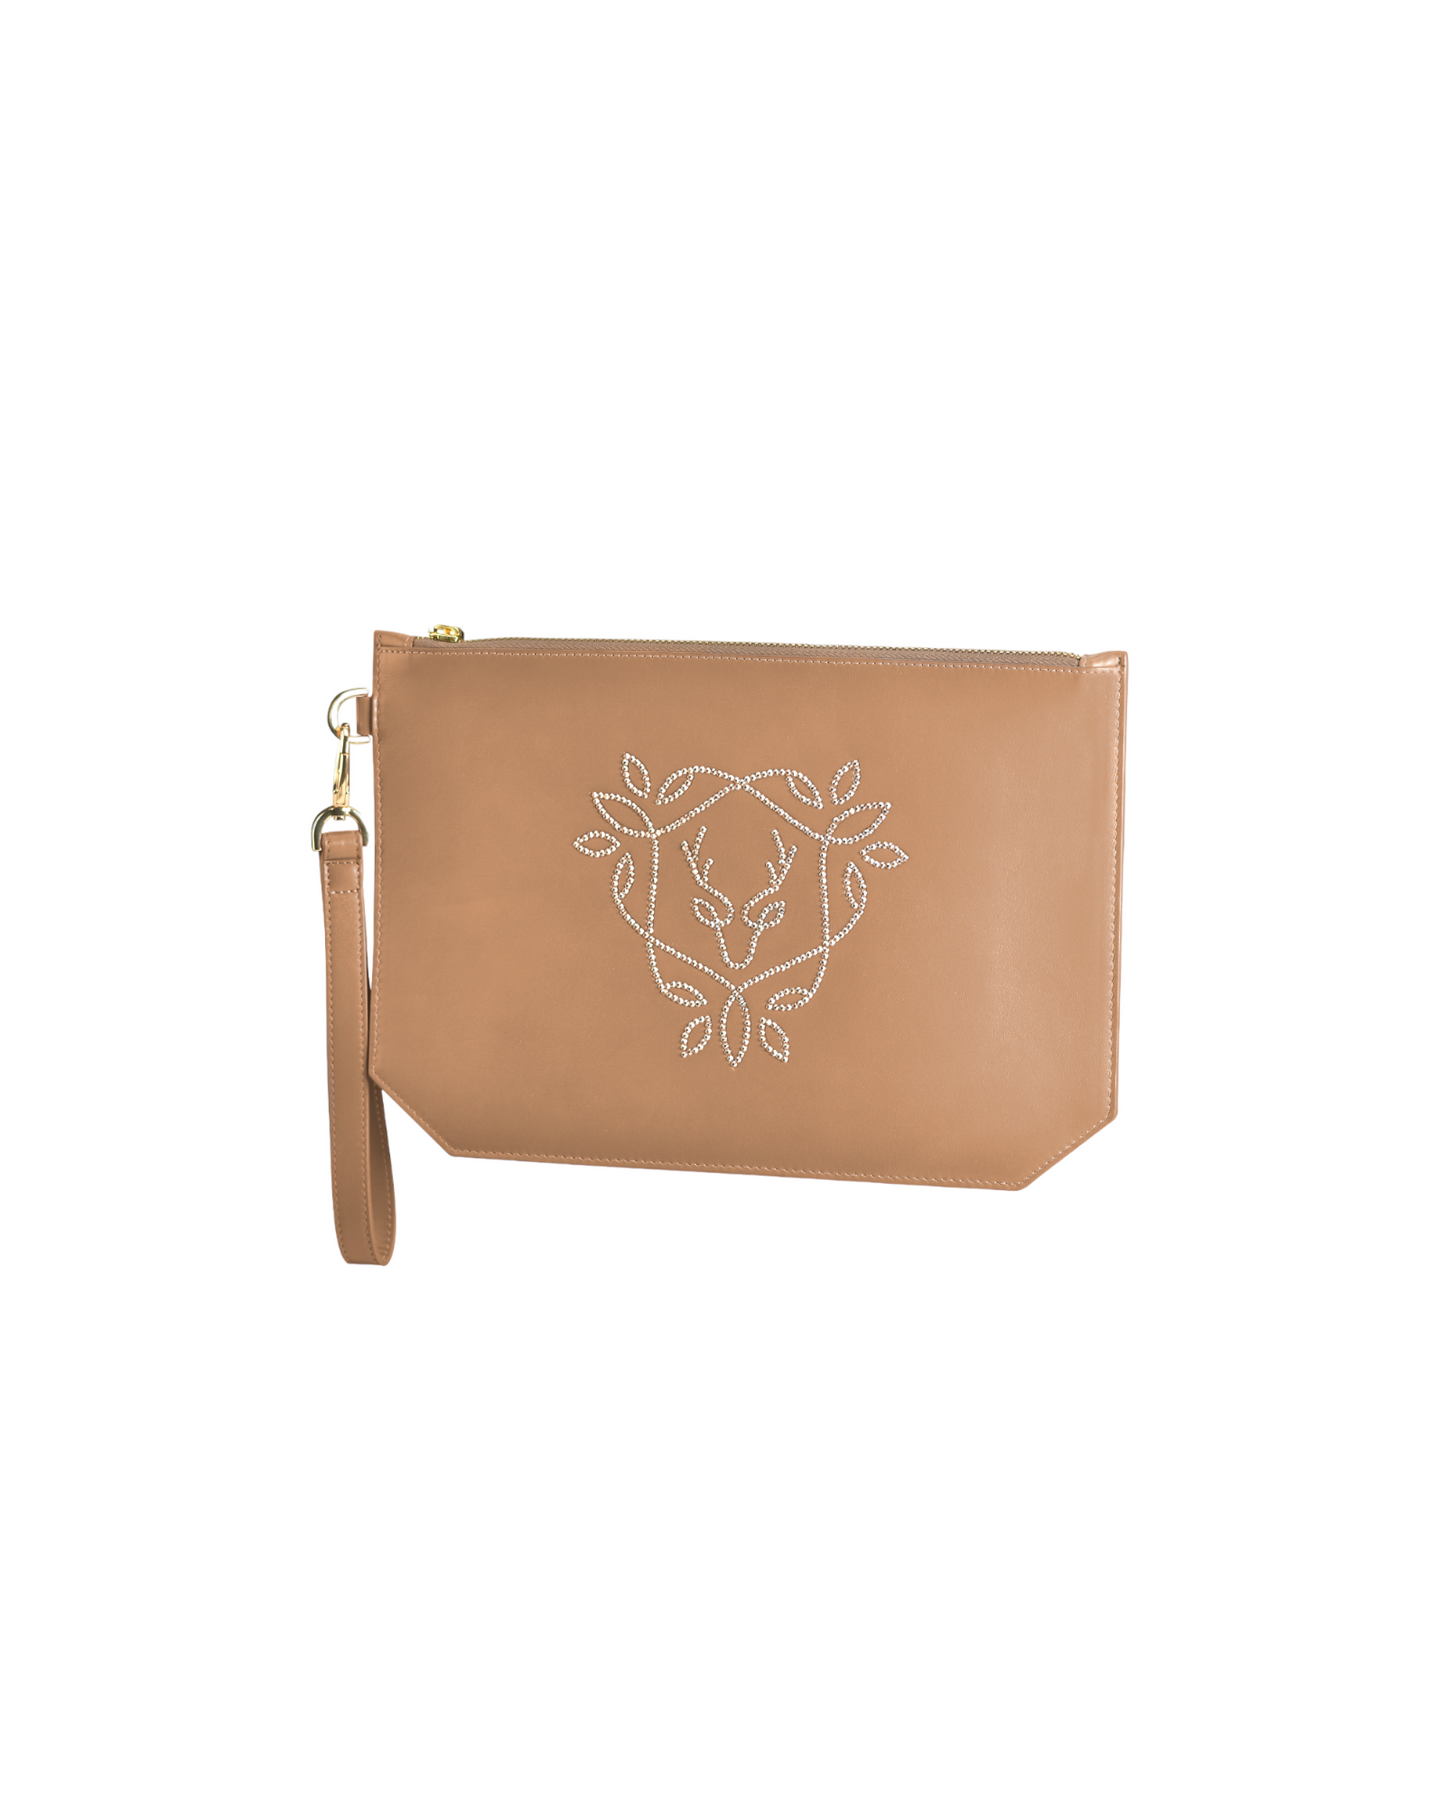 Rania Manasra Camel Leather Pouch